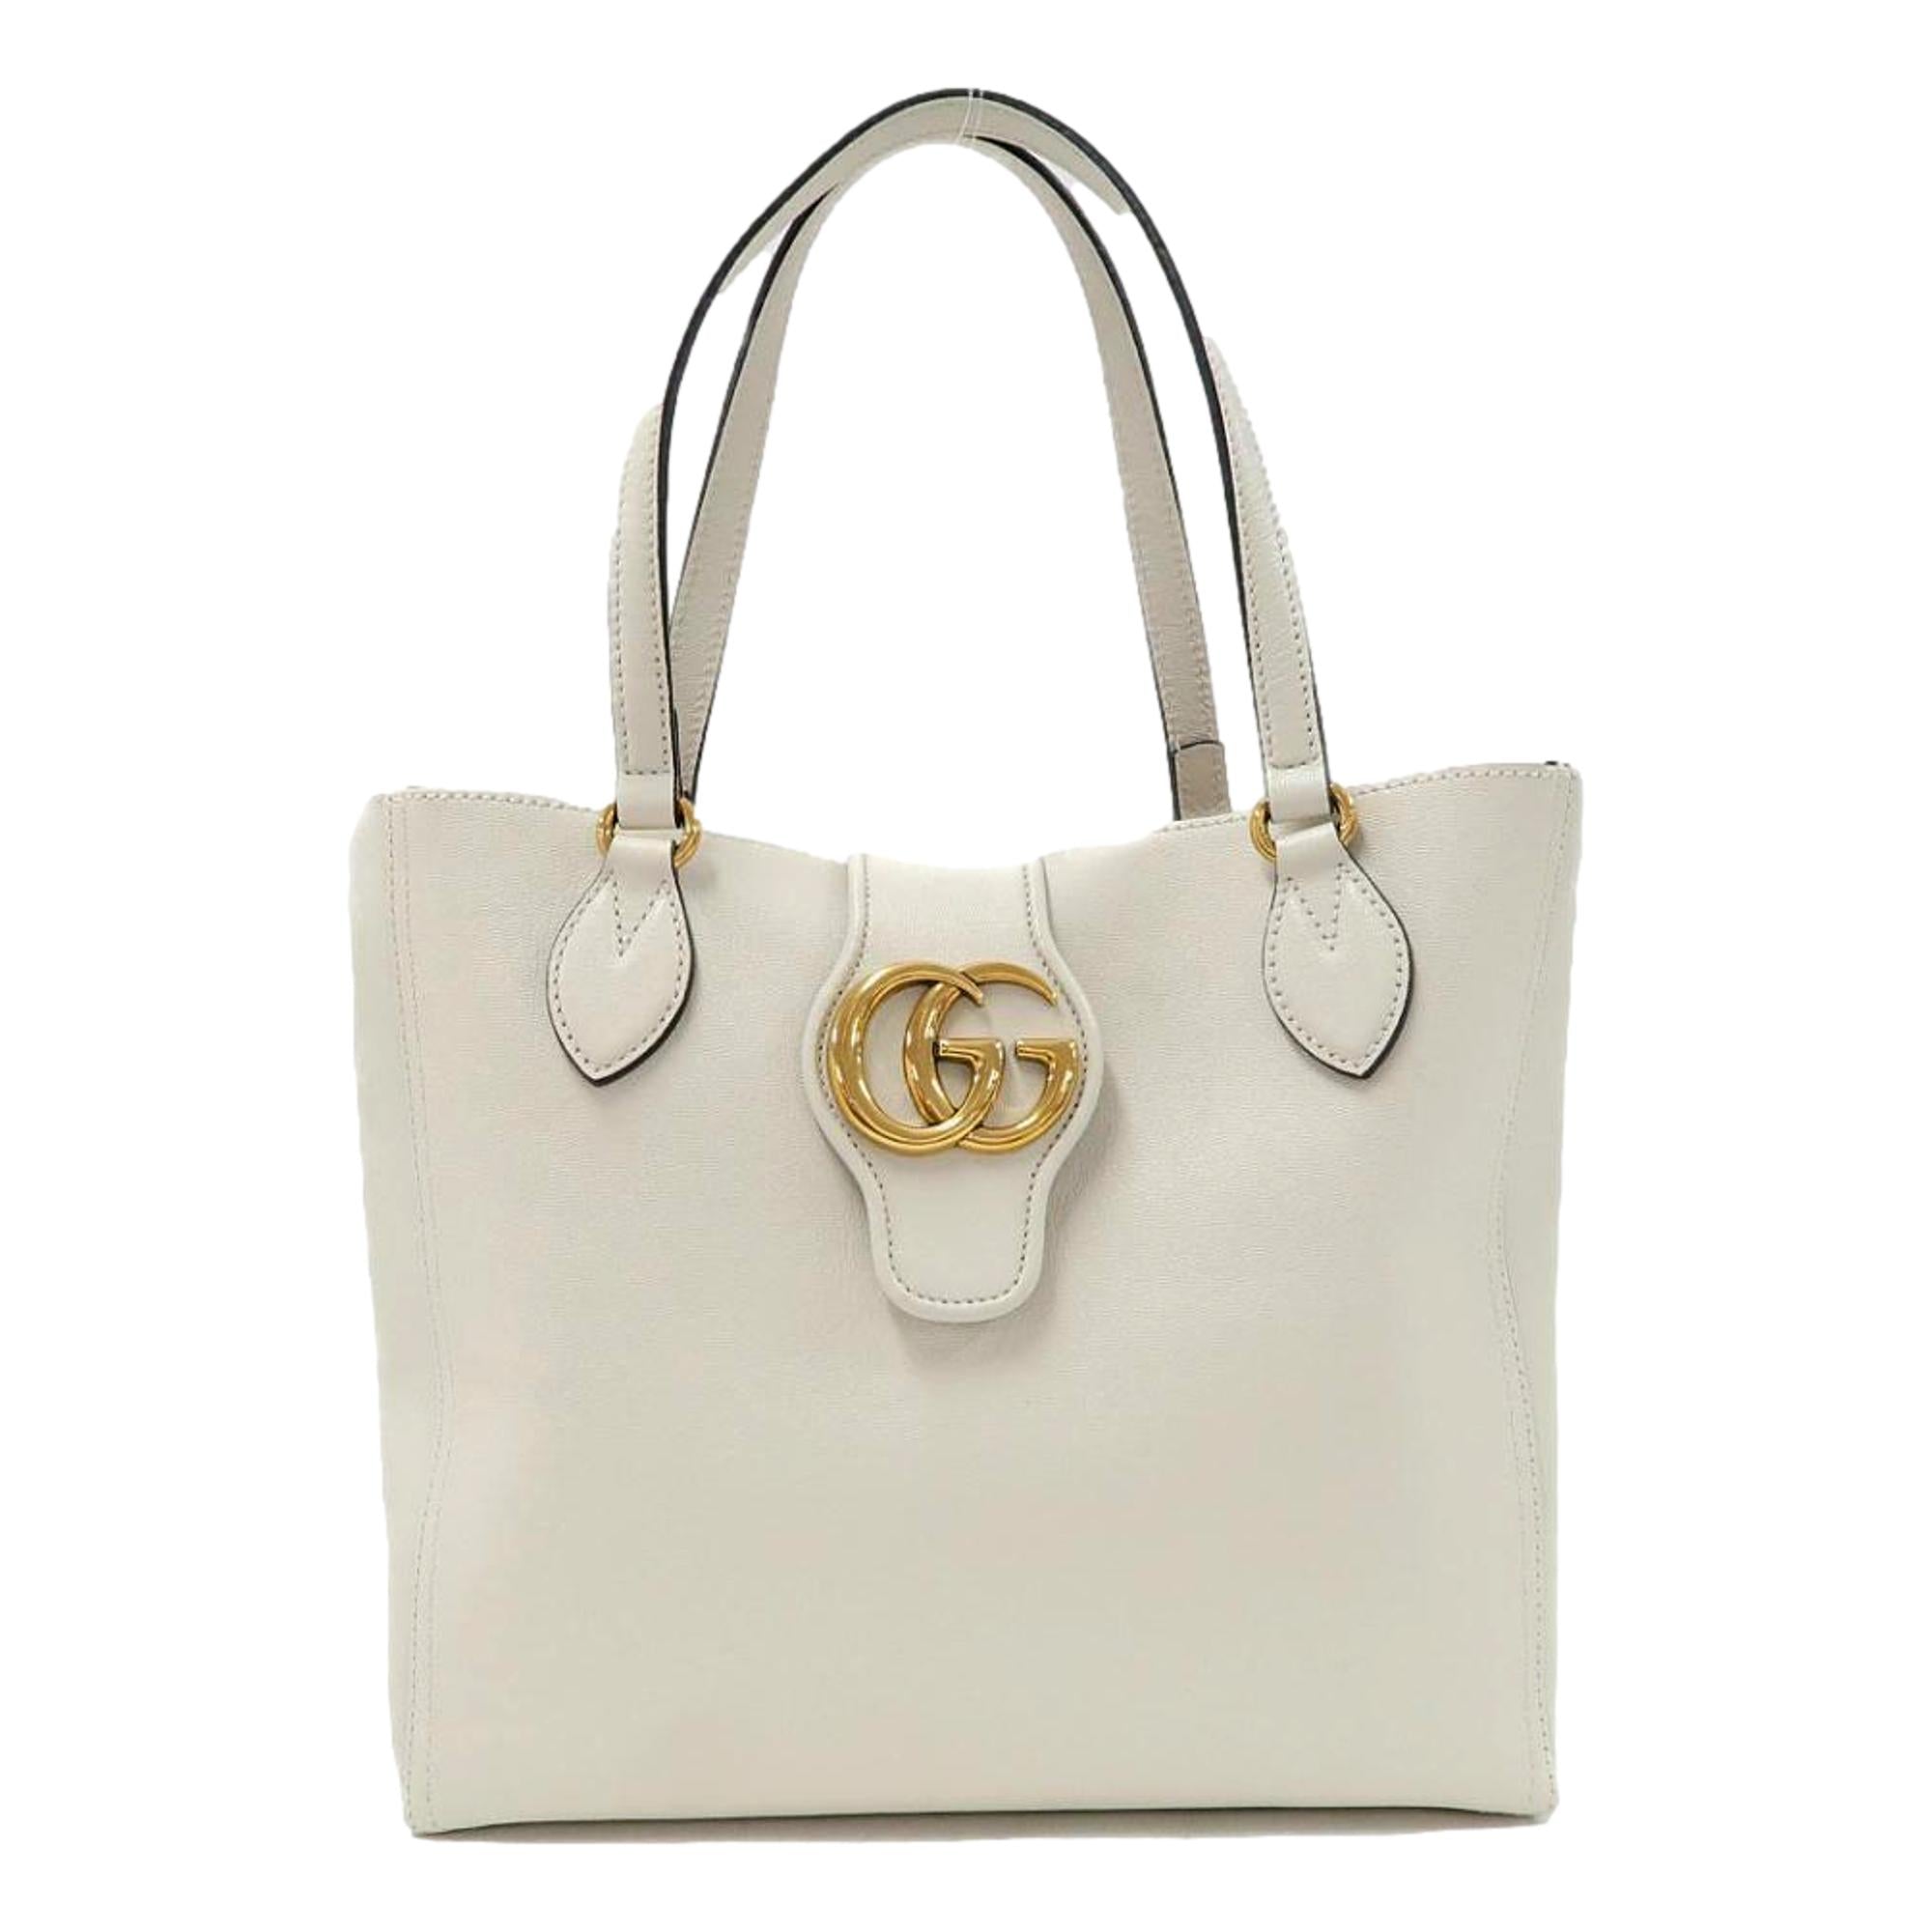 Gucci Dahlia Marmont White Handbag 652680 at_Queen_Bee_of_Beverly_Hills